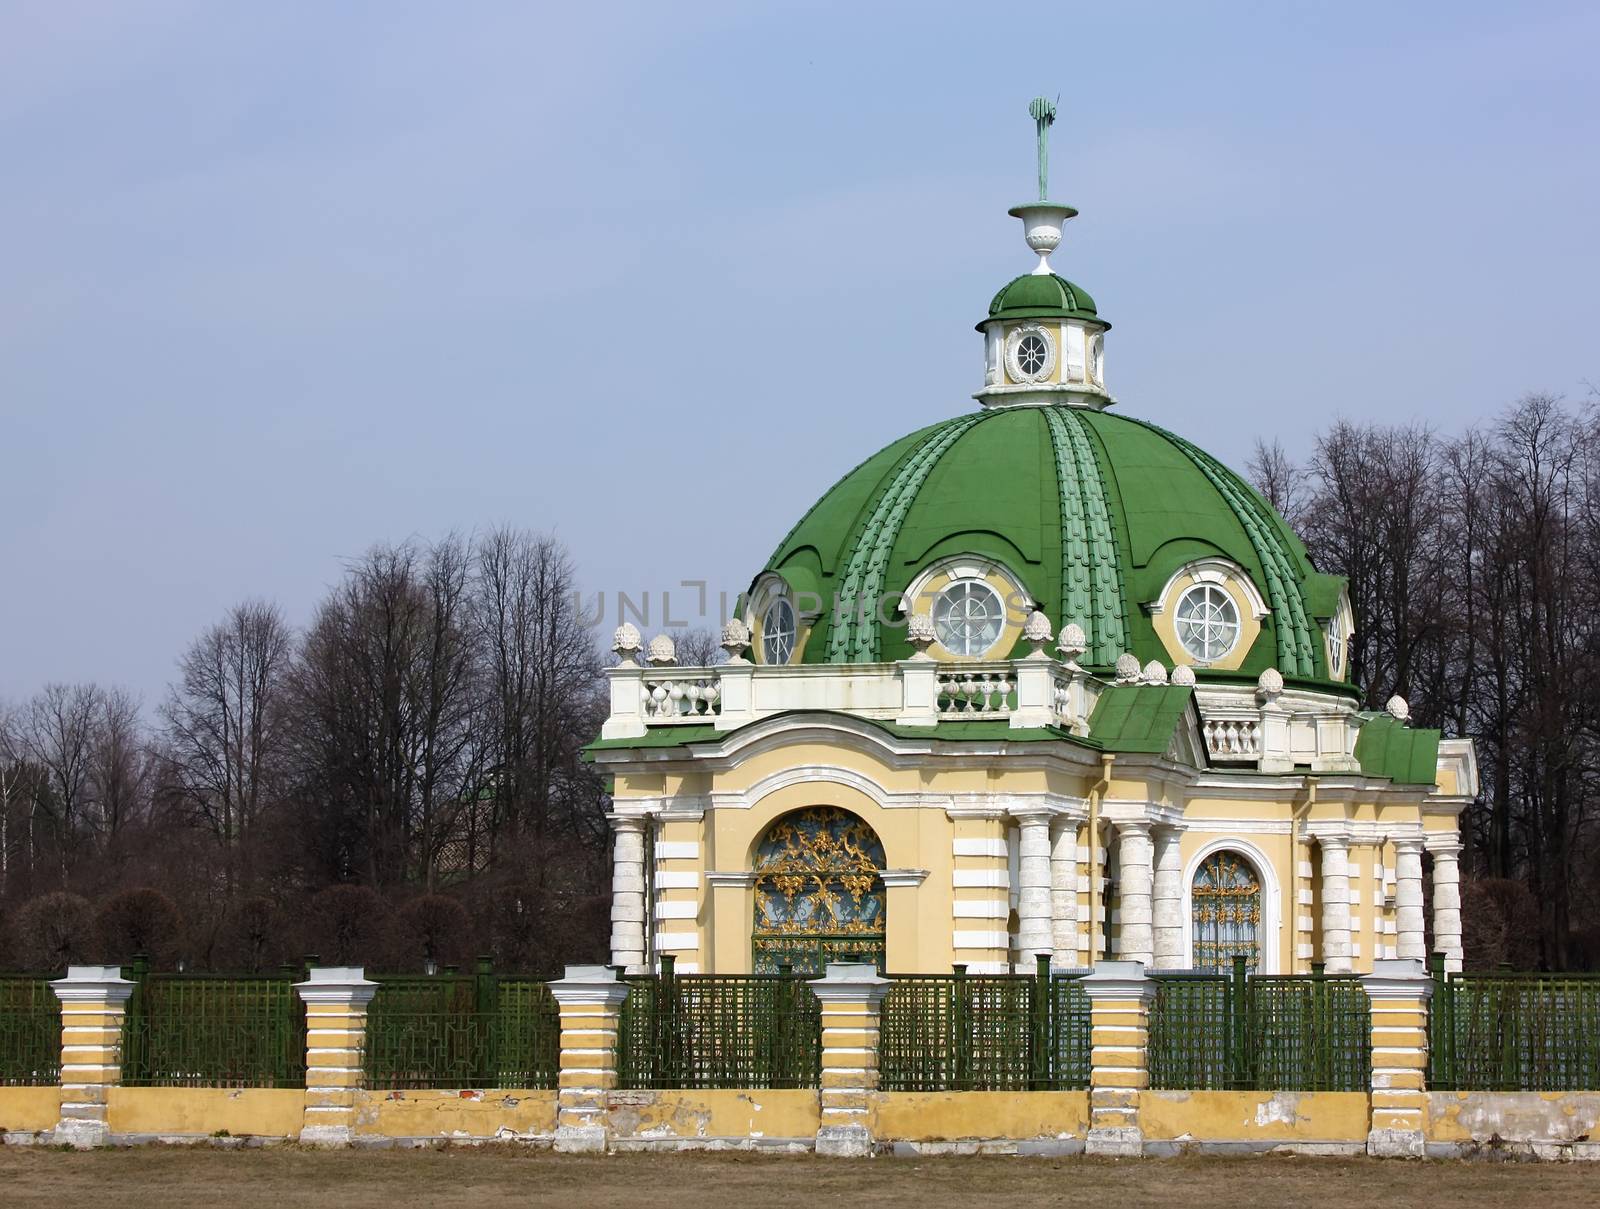 Pavilion a grotto in Kuskovo, Moscow by borisb17